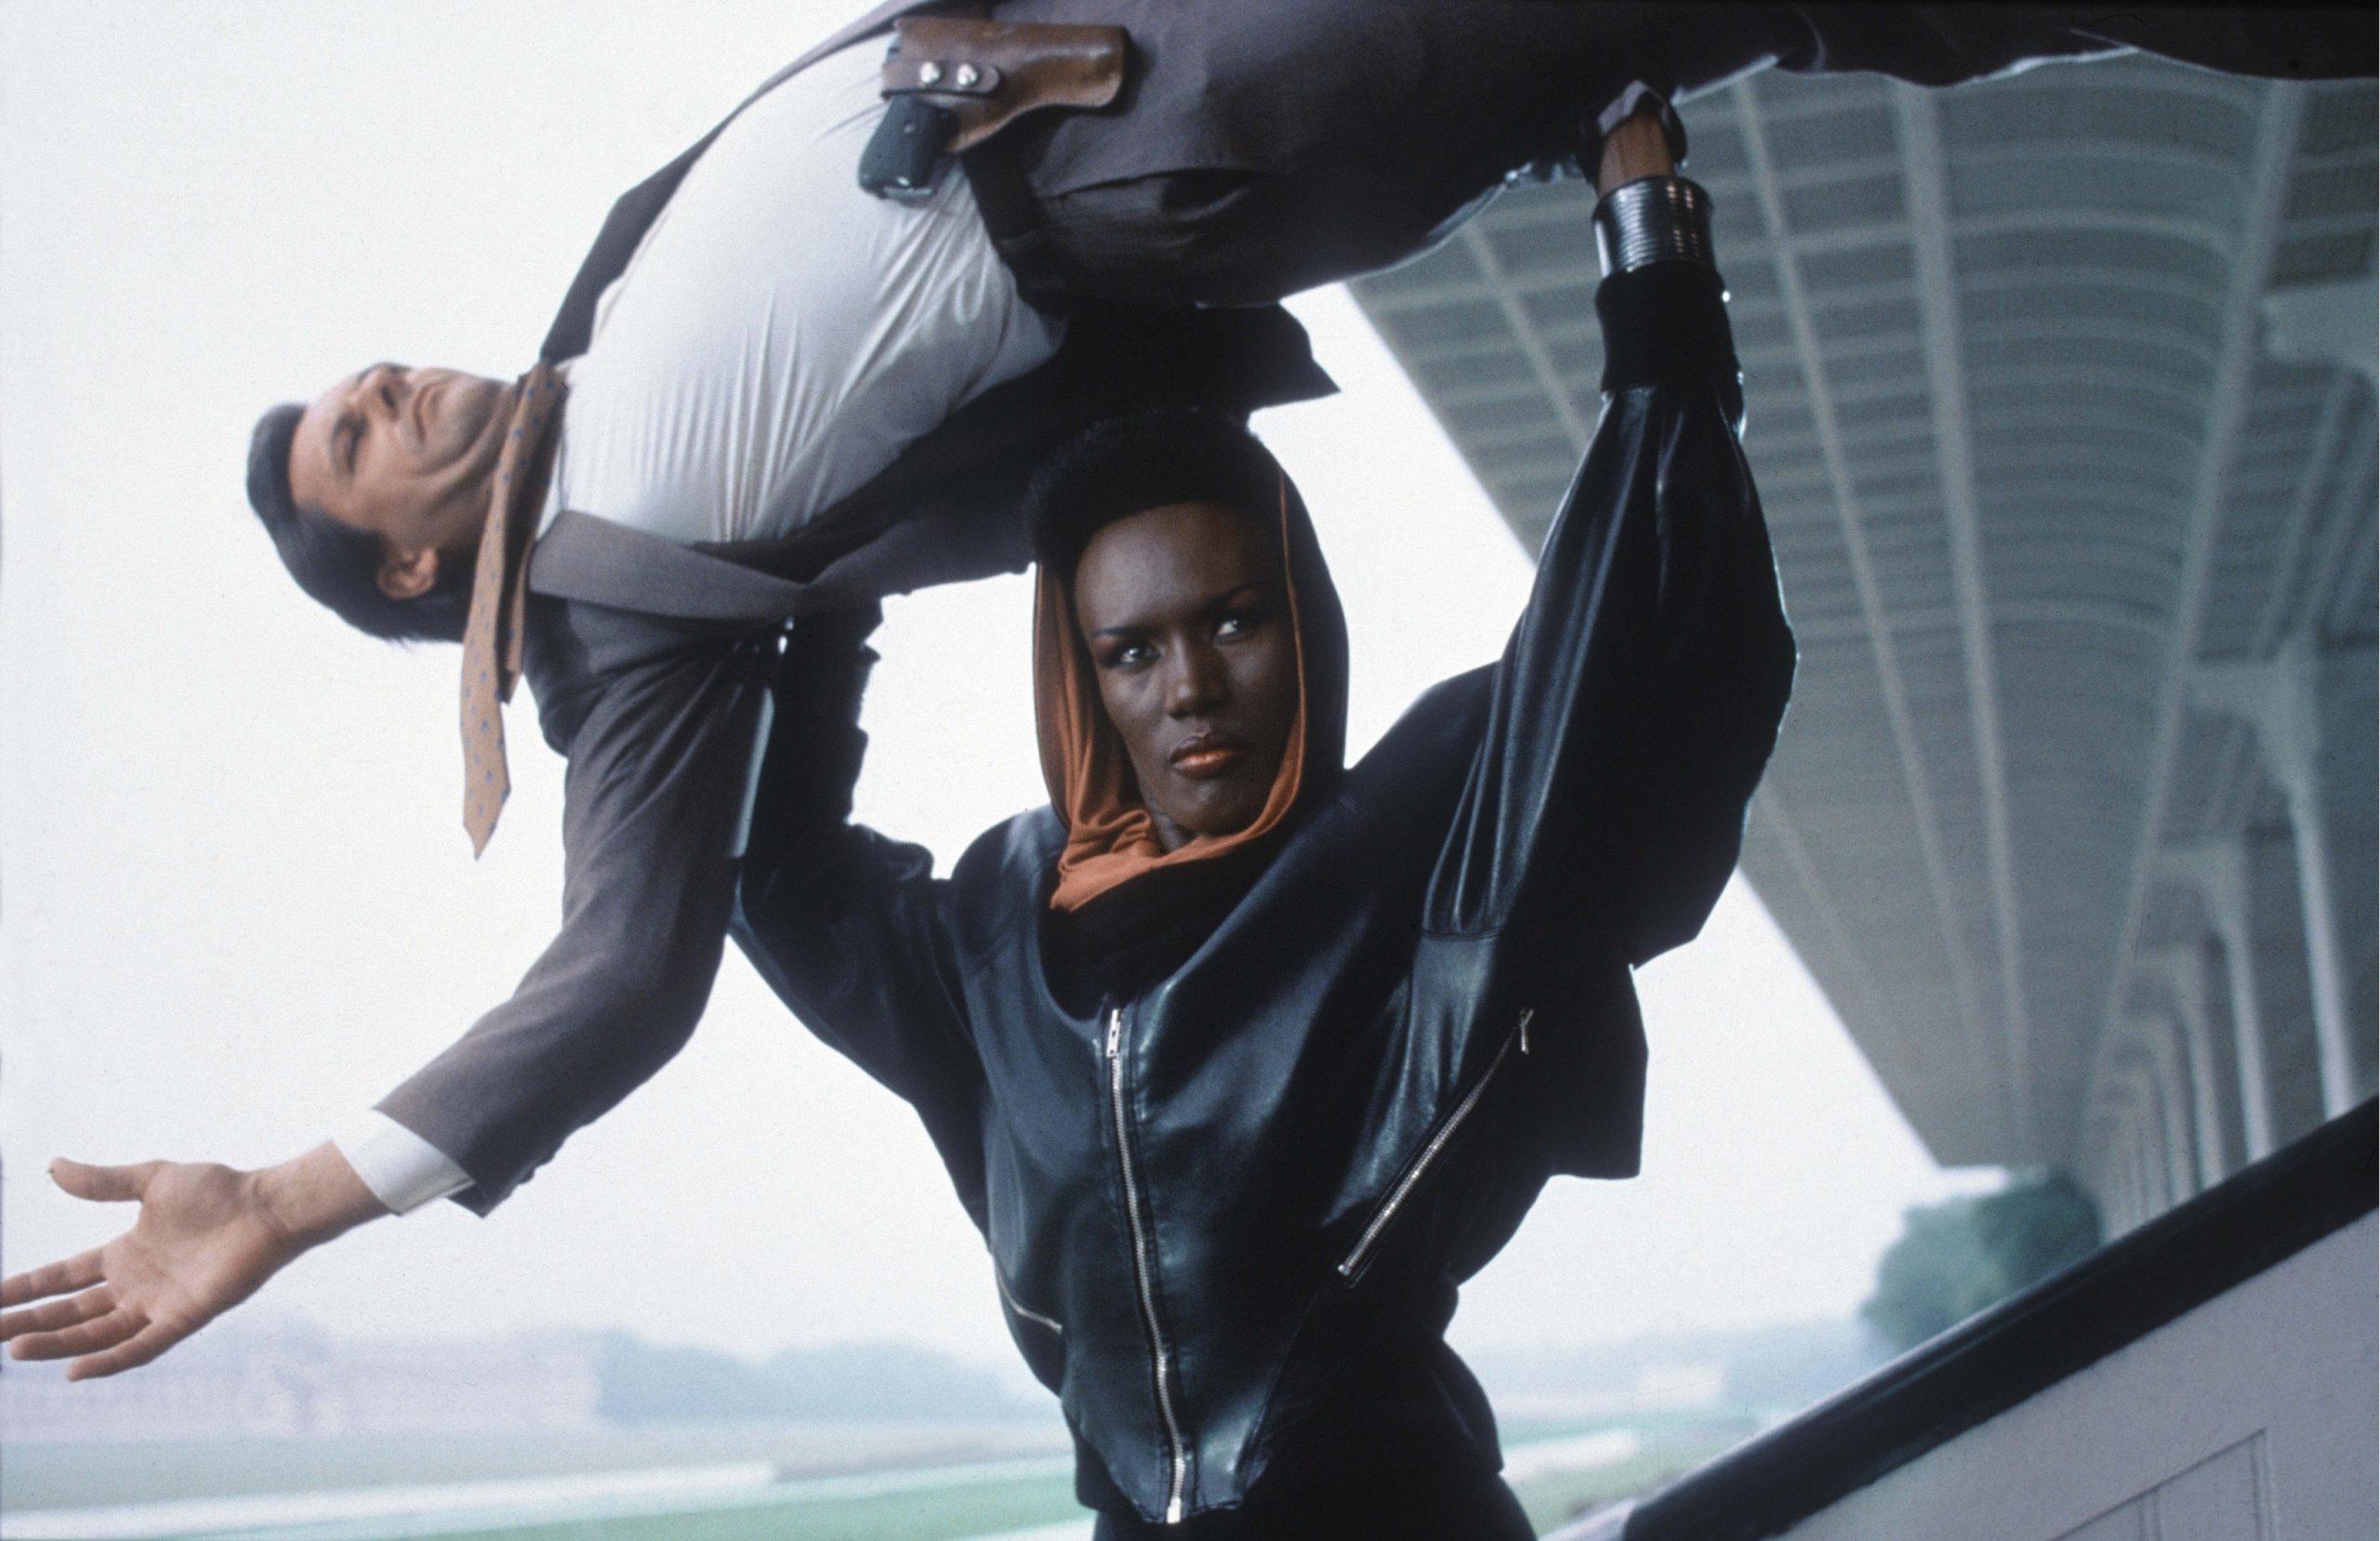 Grace Jones In "A View To A Kill" - 1985